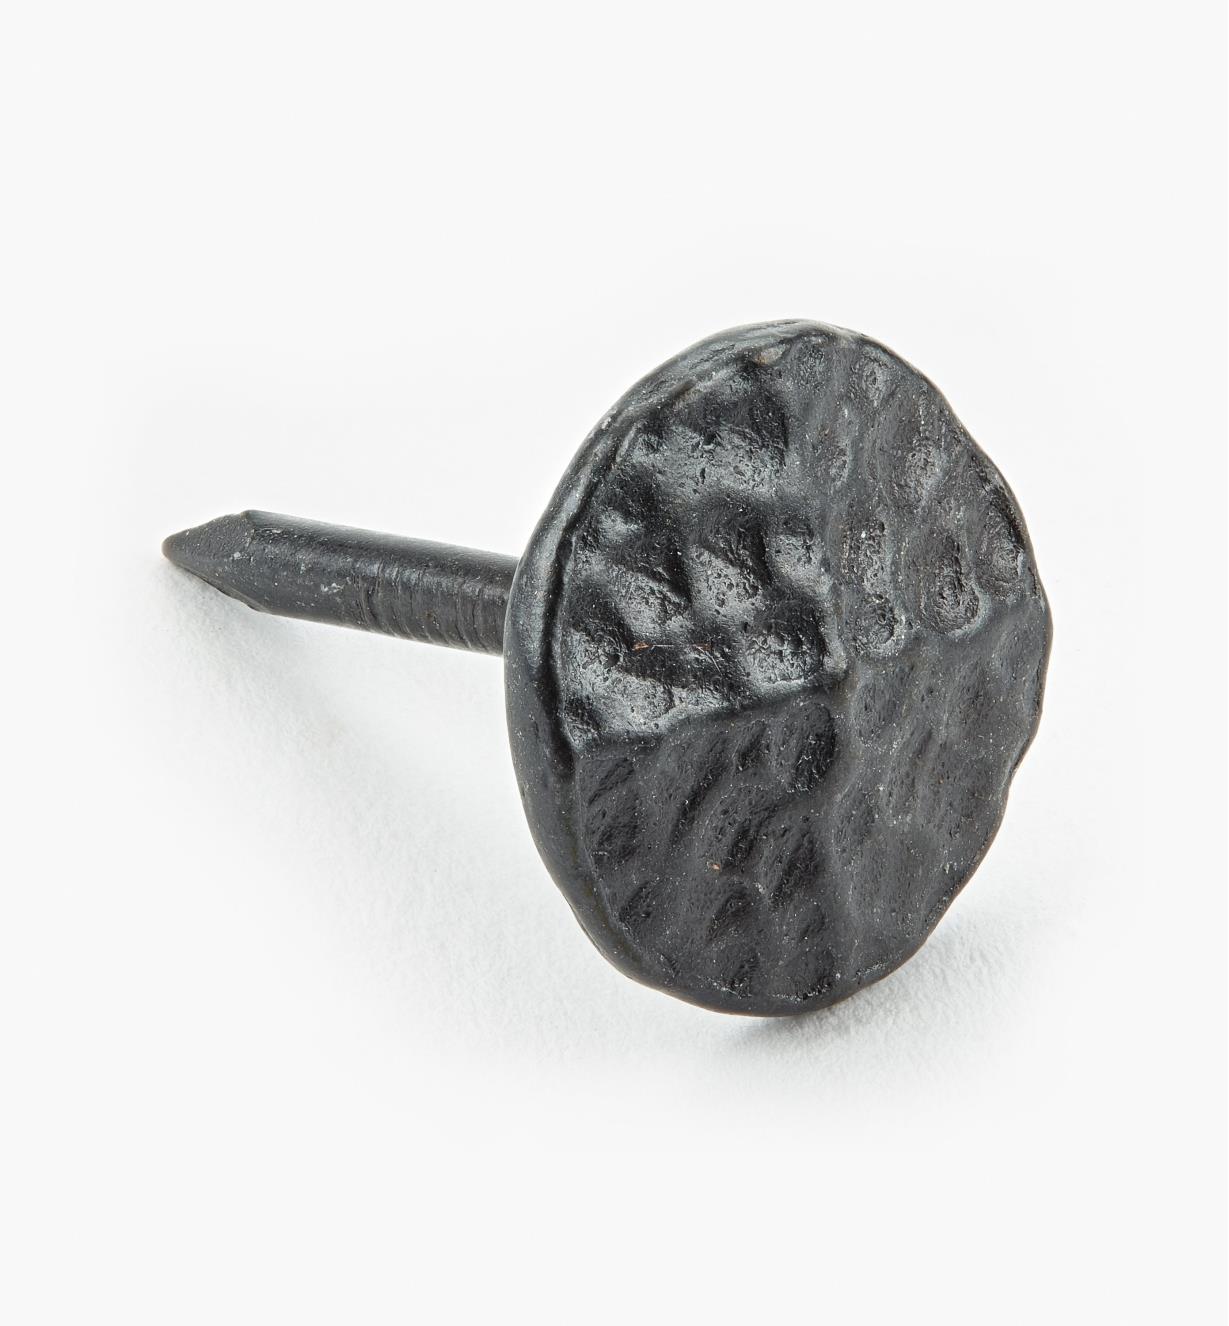 00T0901 - Black Hammered-Finish, Round Head, 5/8" Clavo, ea.